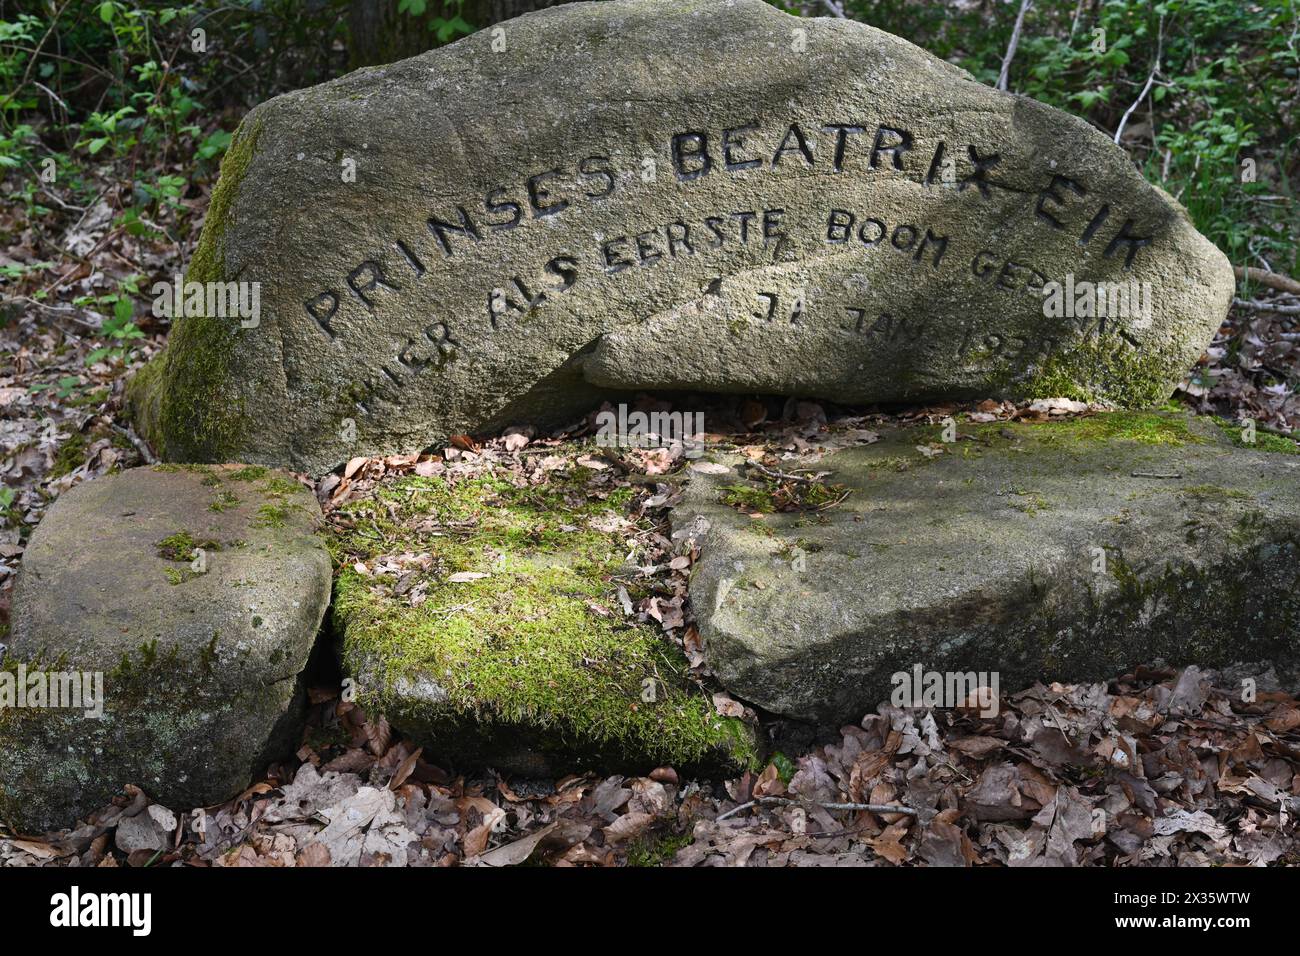 NL, Eesergroen: Spring shapes the landscape, cities and people in the province of Drenthe in the Netherlands. Memorial oak for Princess Beatrix (later Stock Photo